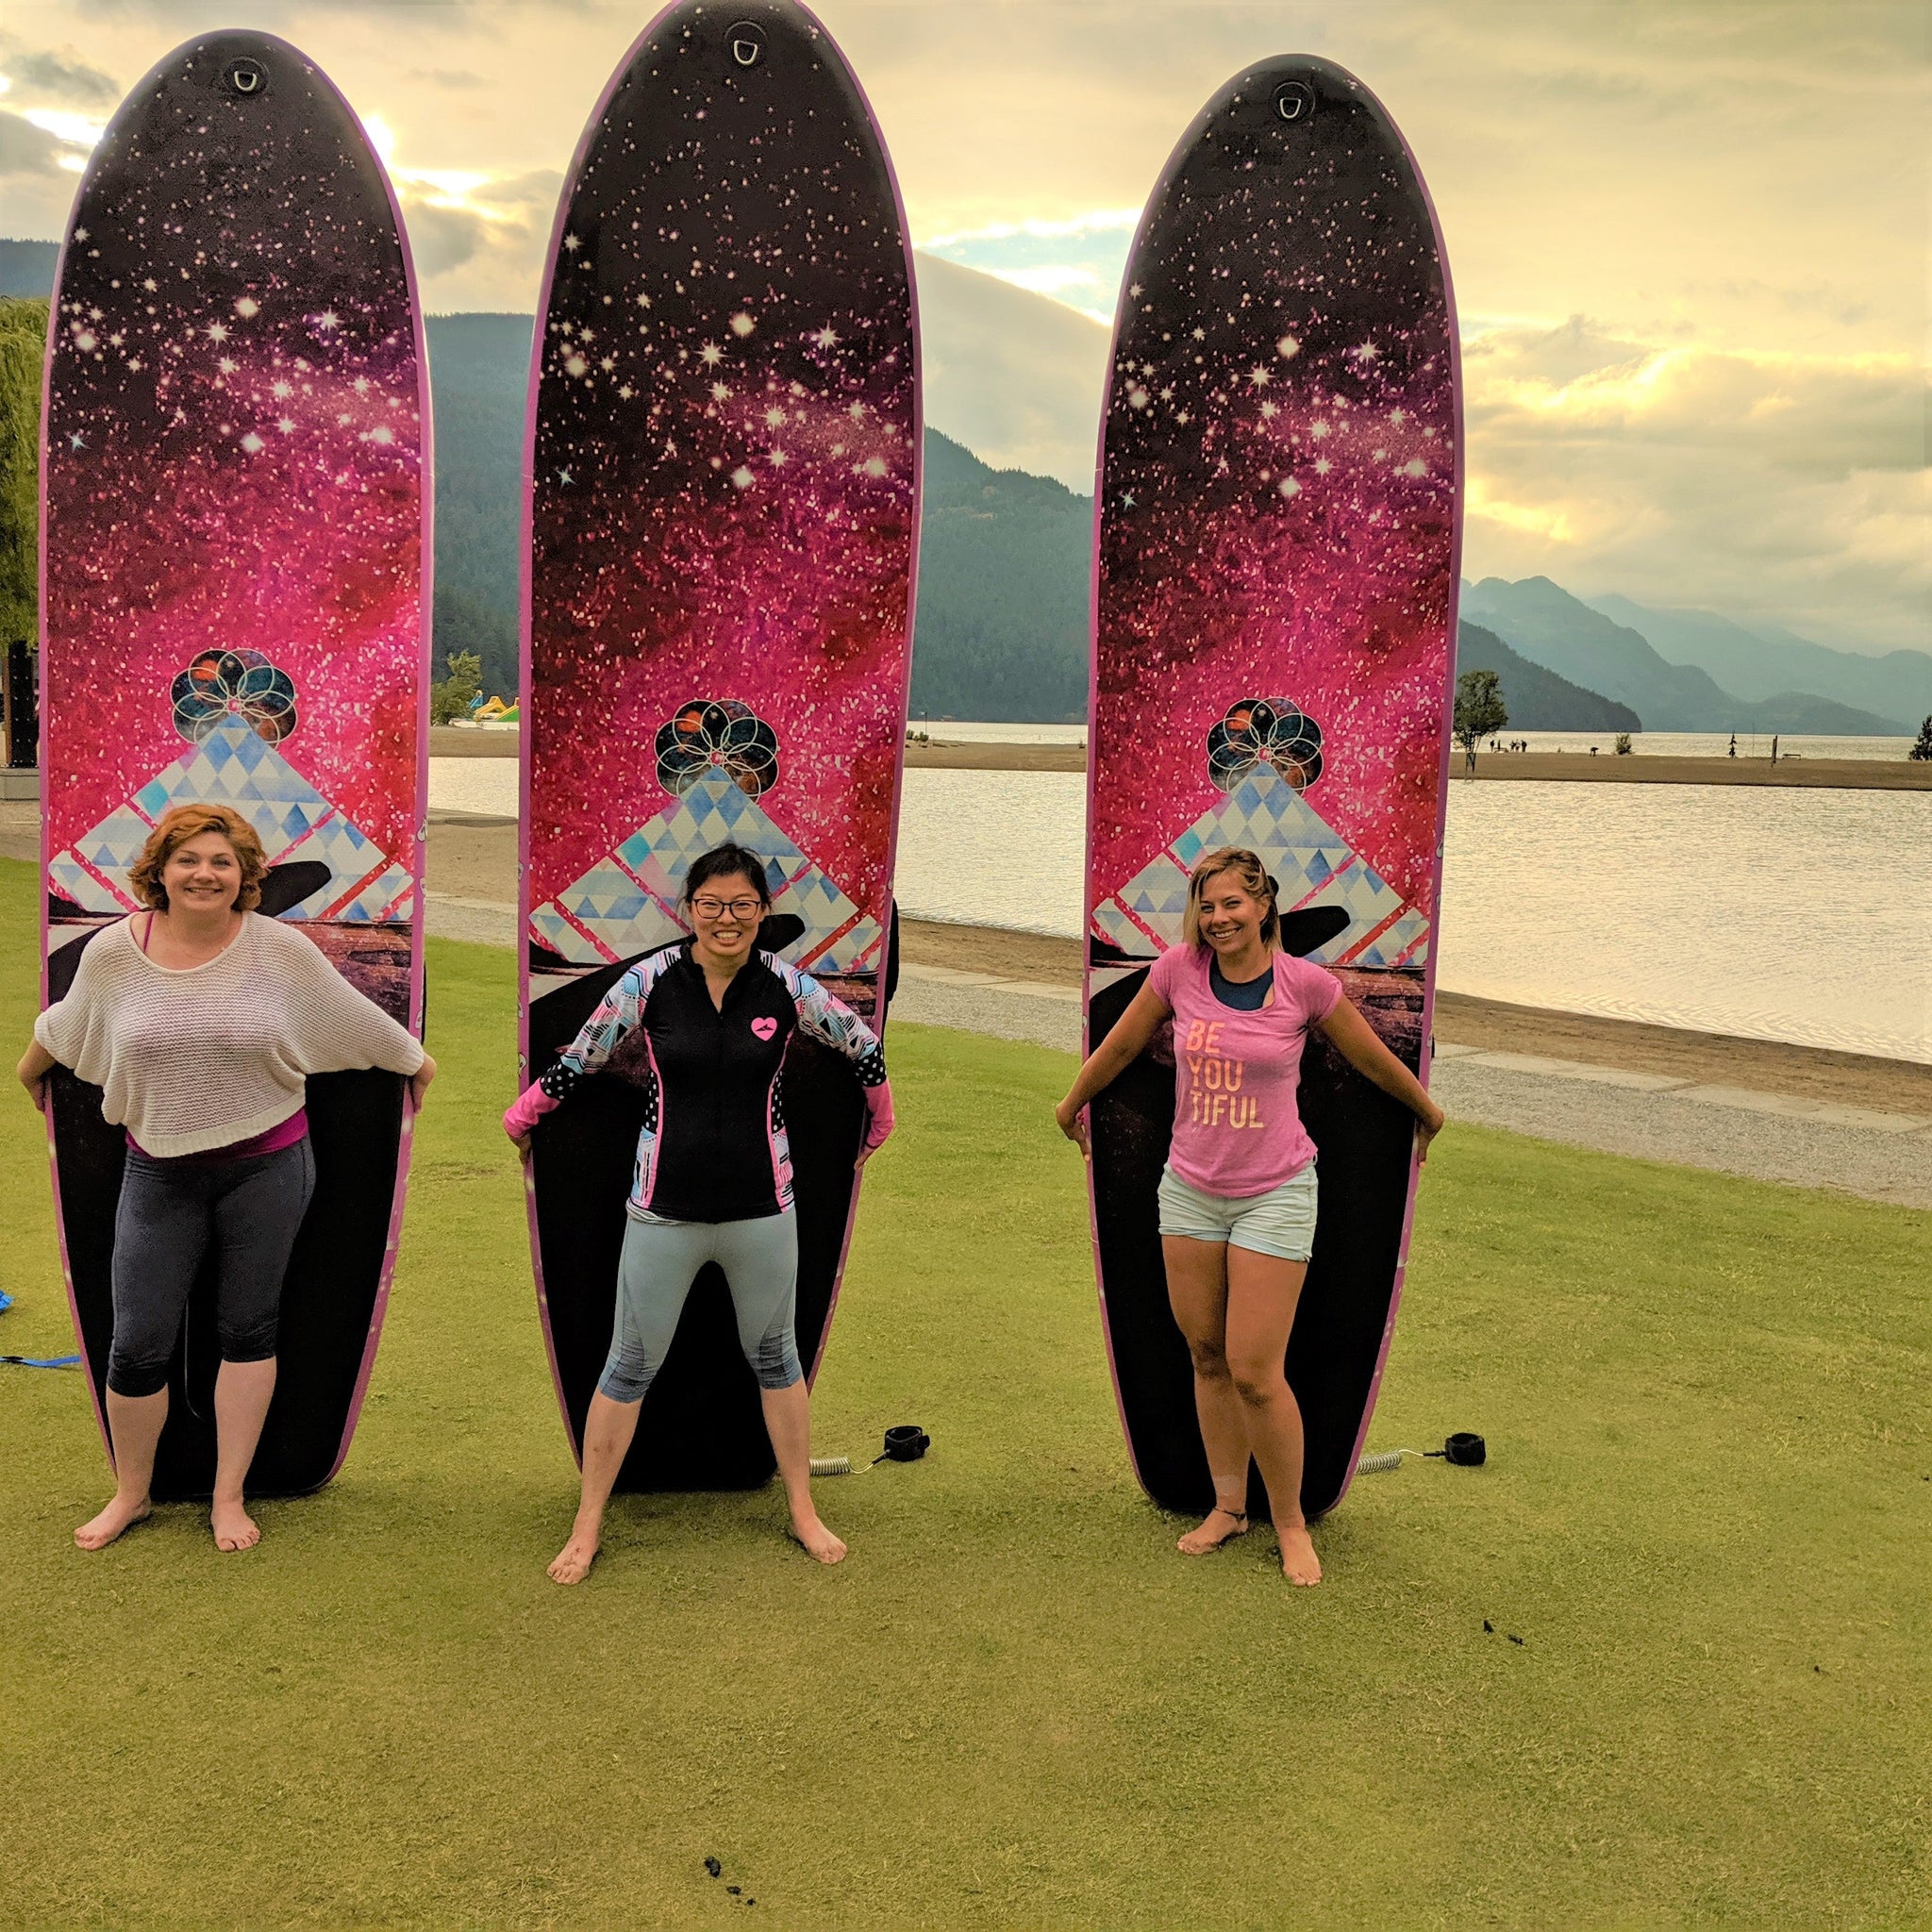 3 ladies posing with the Infinite Mantra board on the grass.